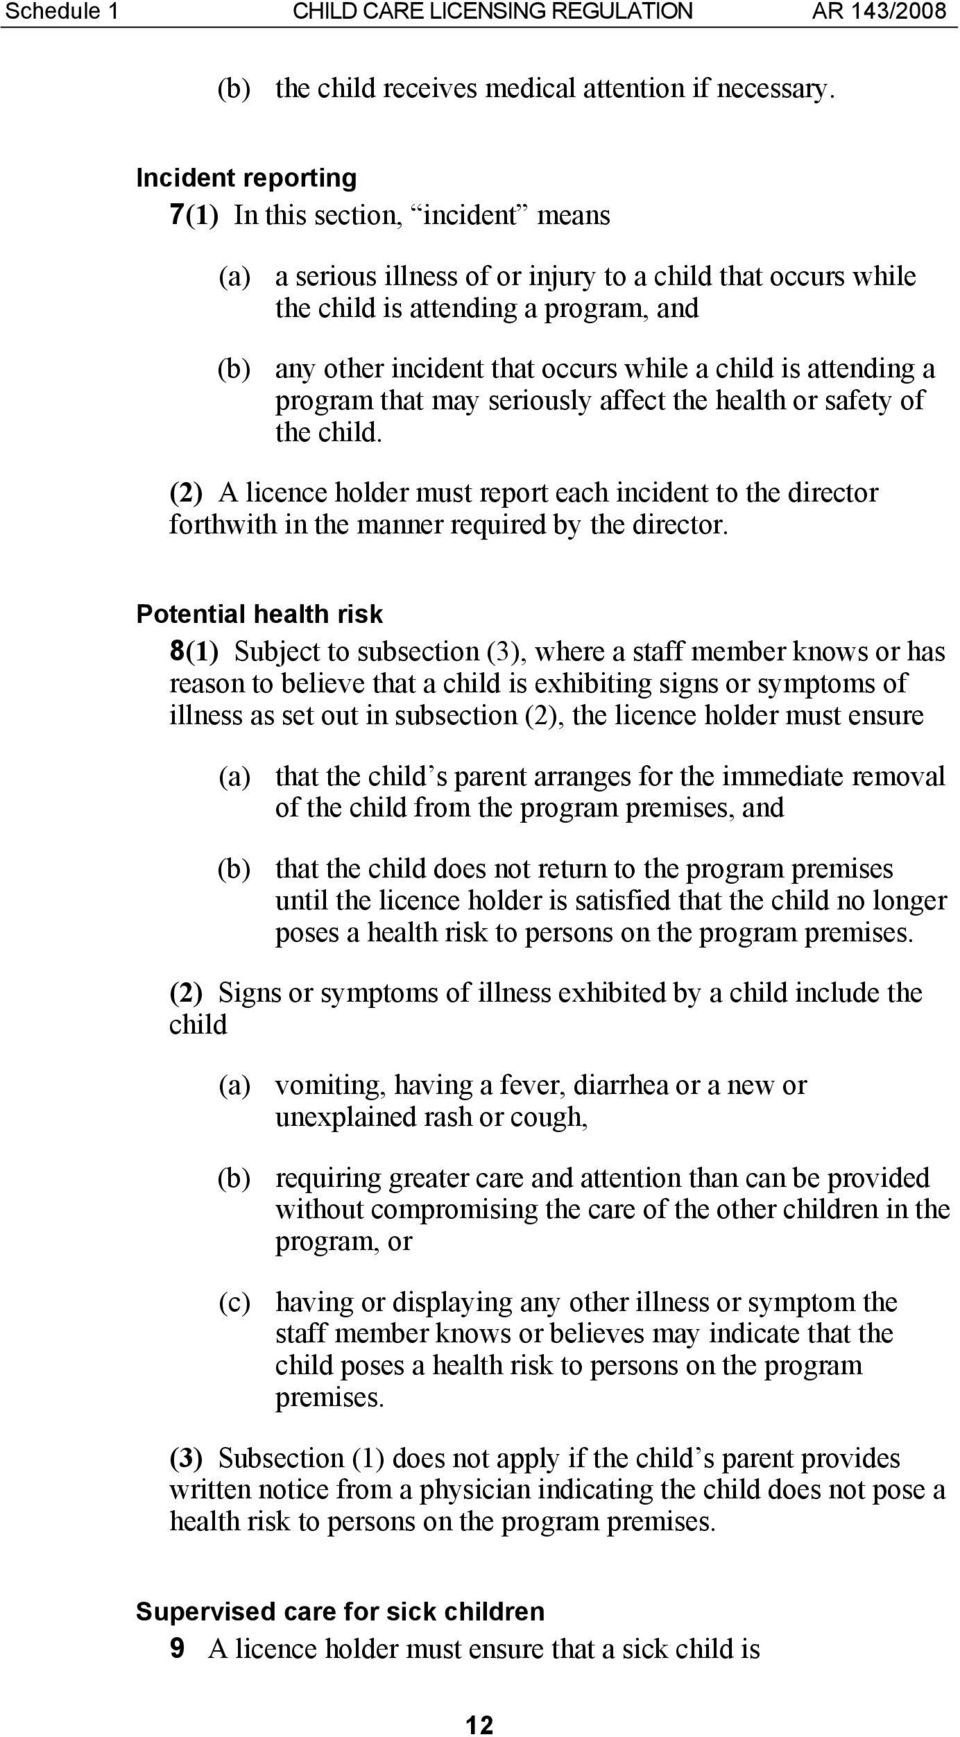 a child is attending a program that may seriously affect the health or safety of the child.